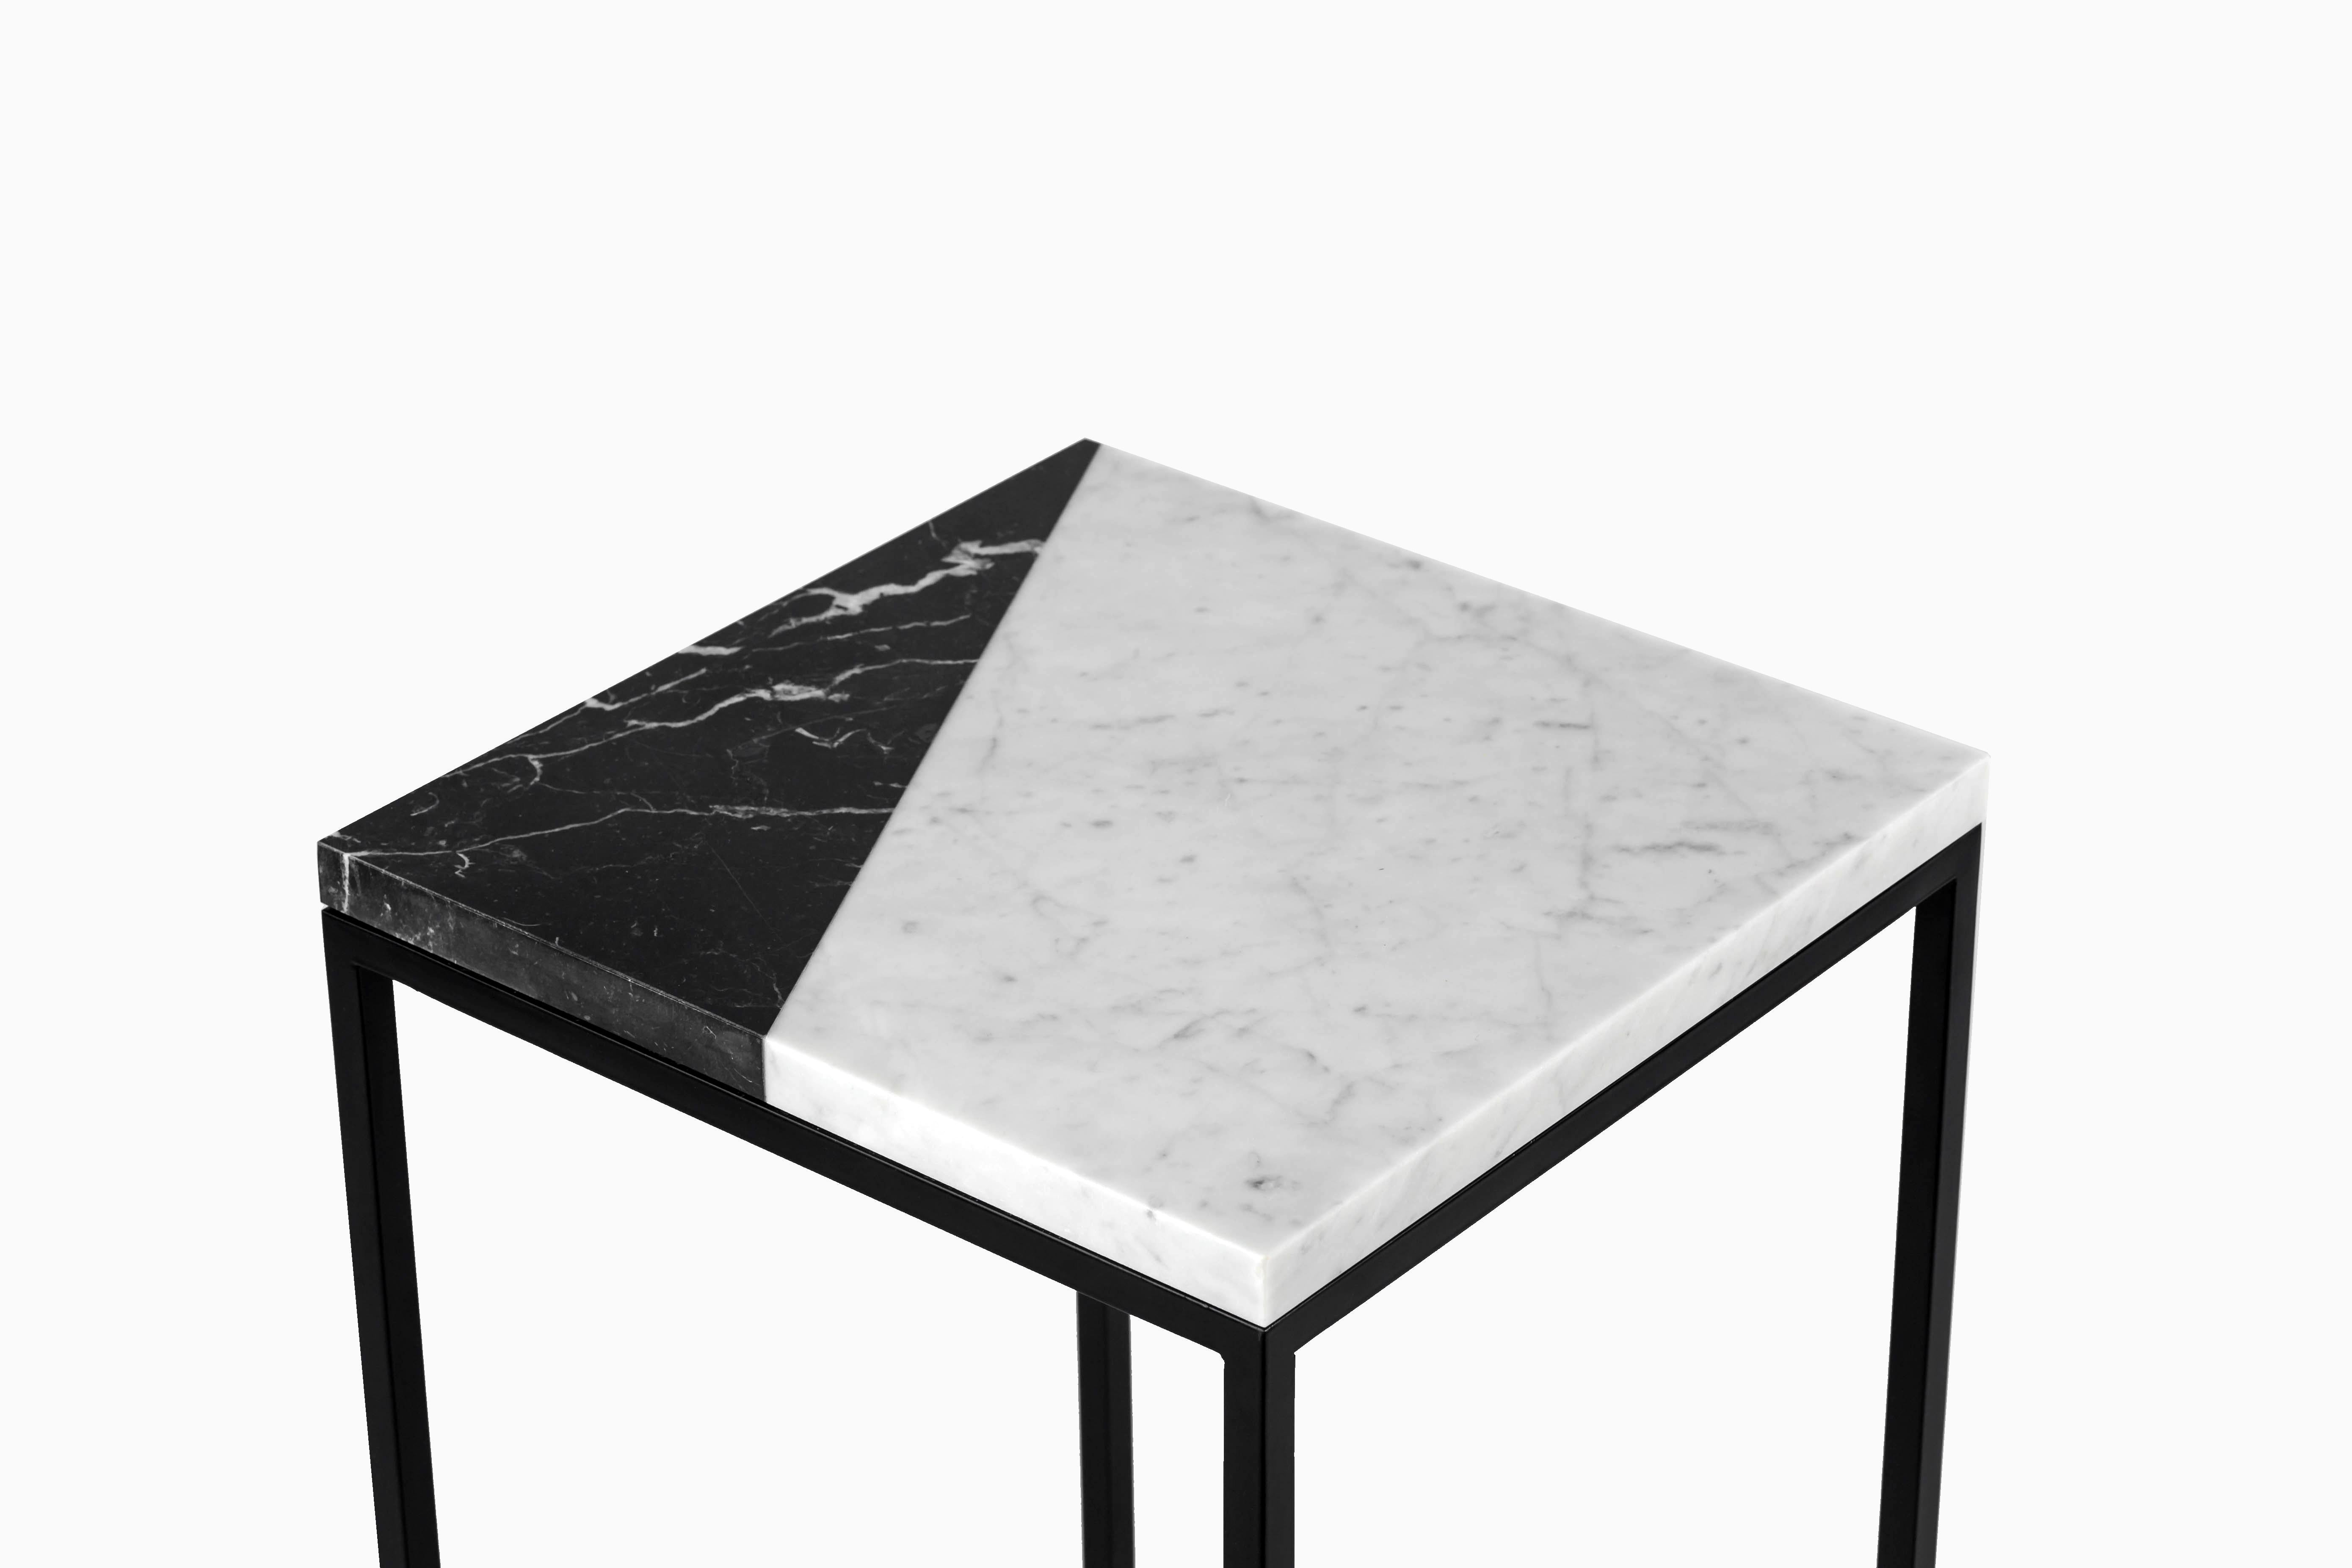 Polish Set of 2 Small Black and White Cut Side Tables by Un’common